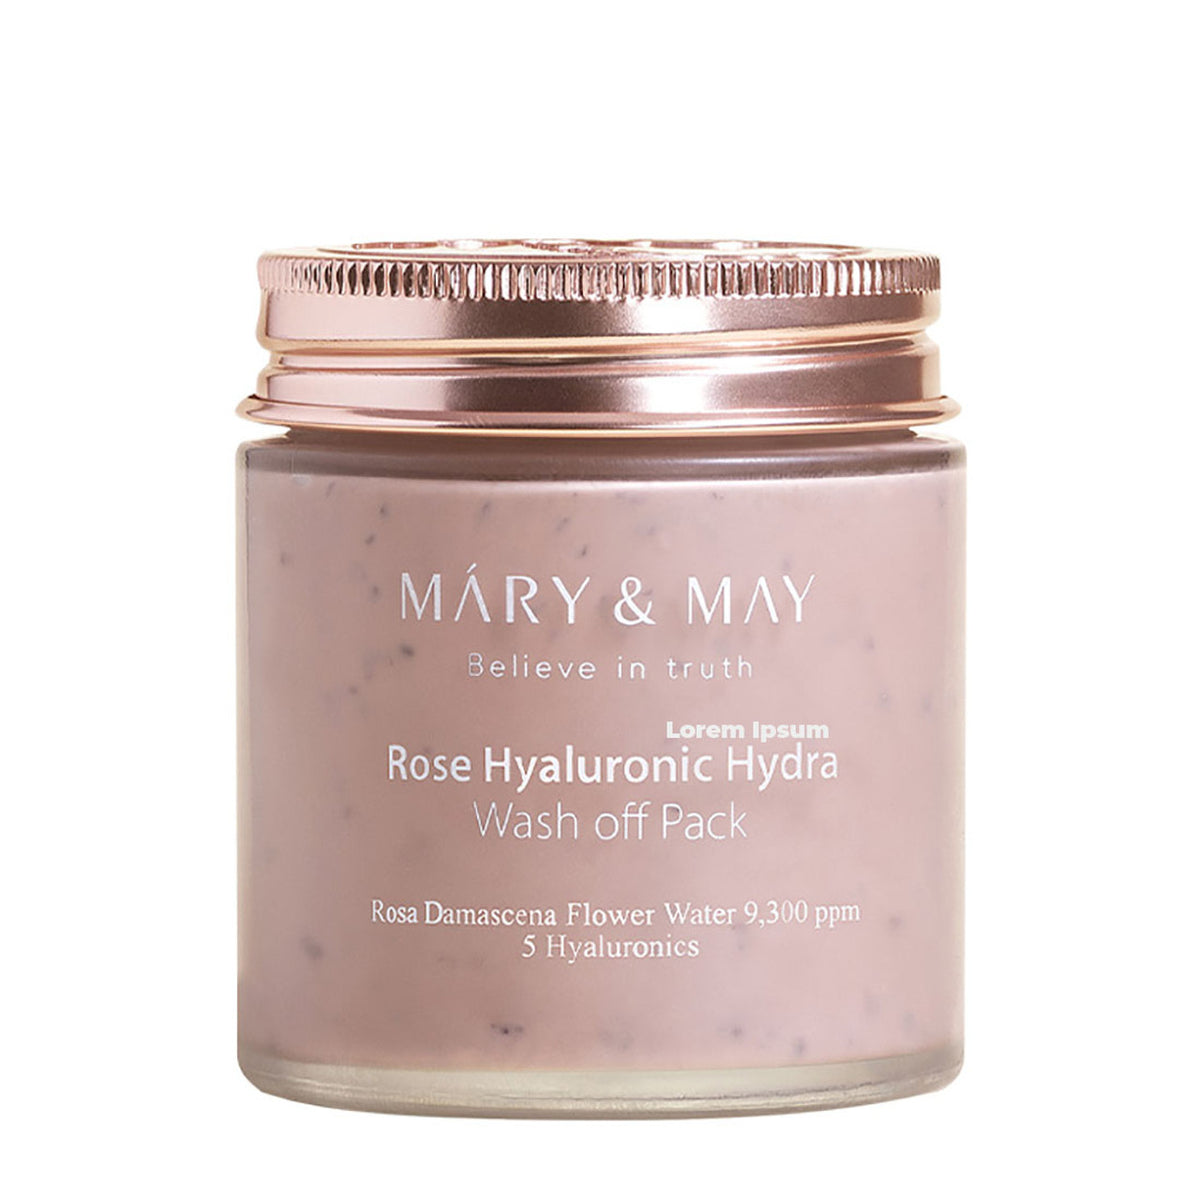 Mary & May - Rose Hyaluronic Hydra Wash Off Pack 125g